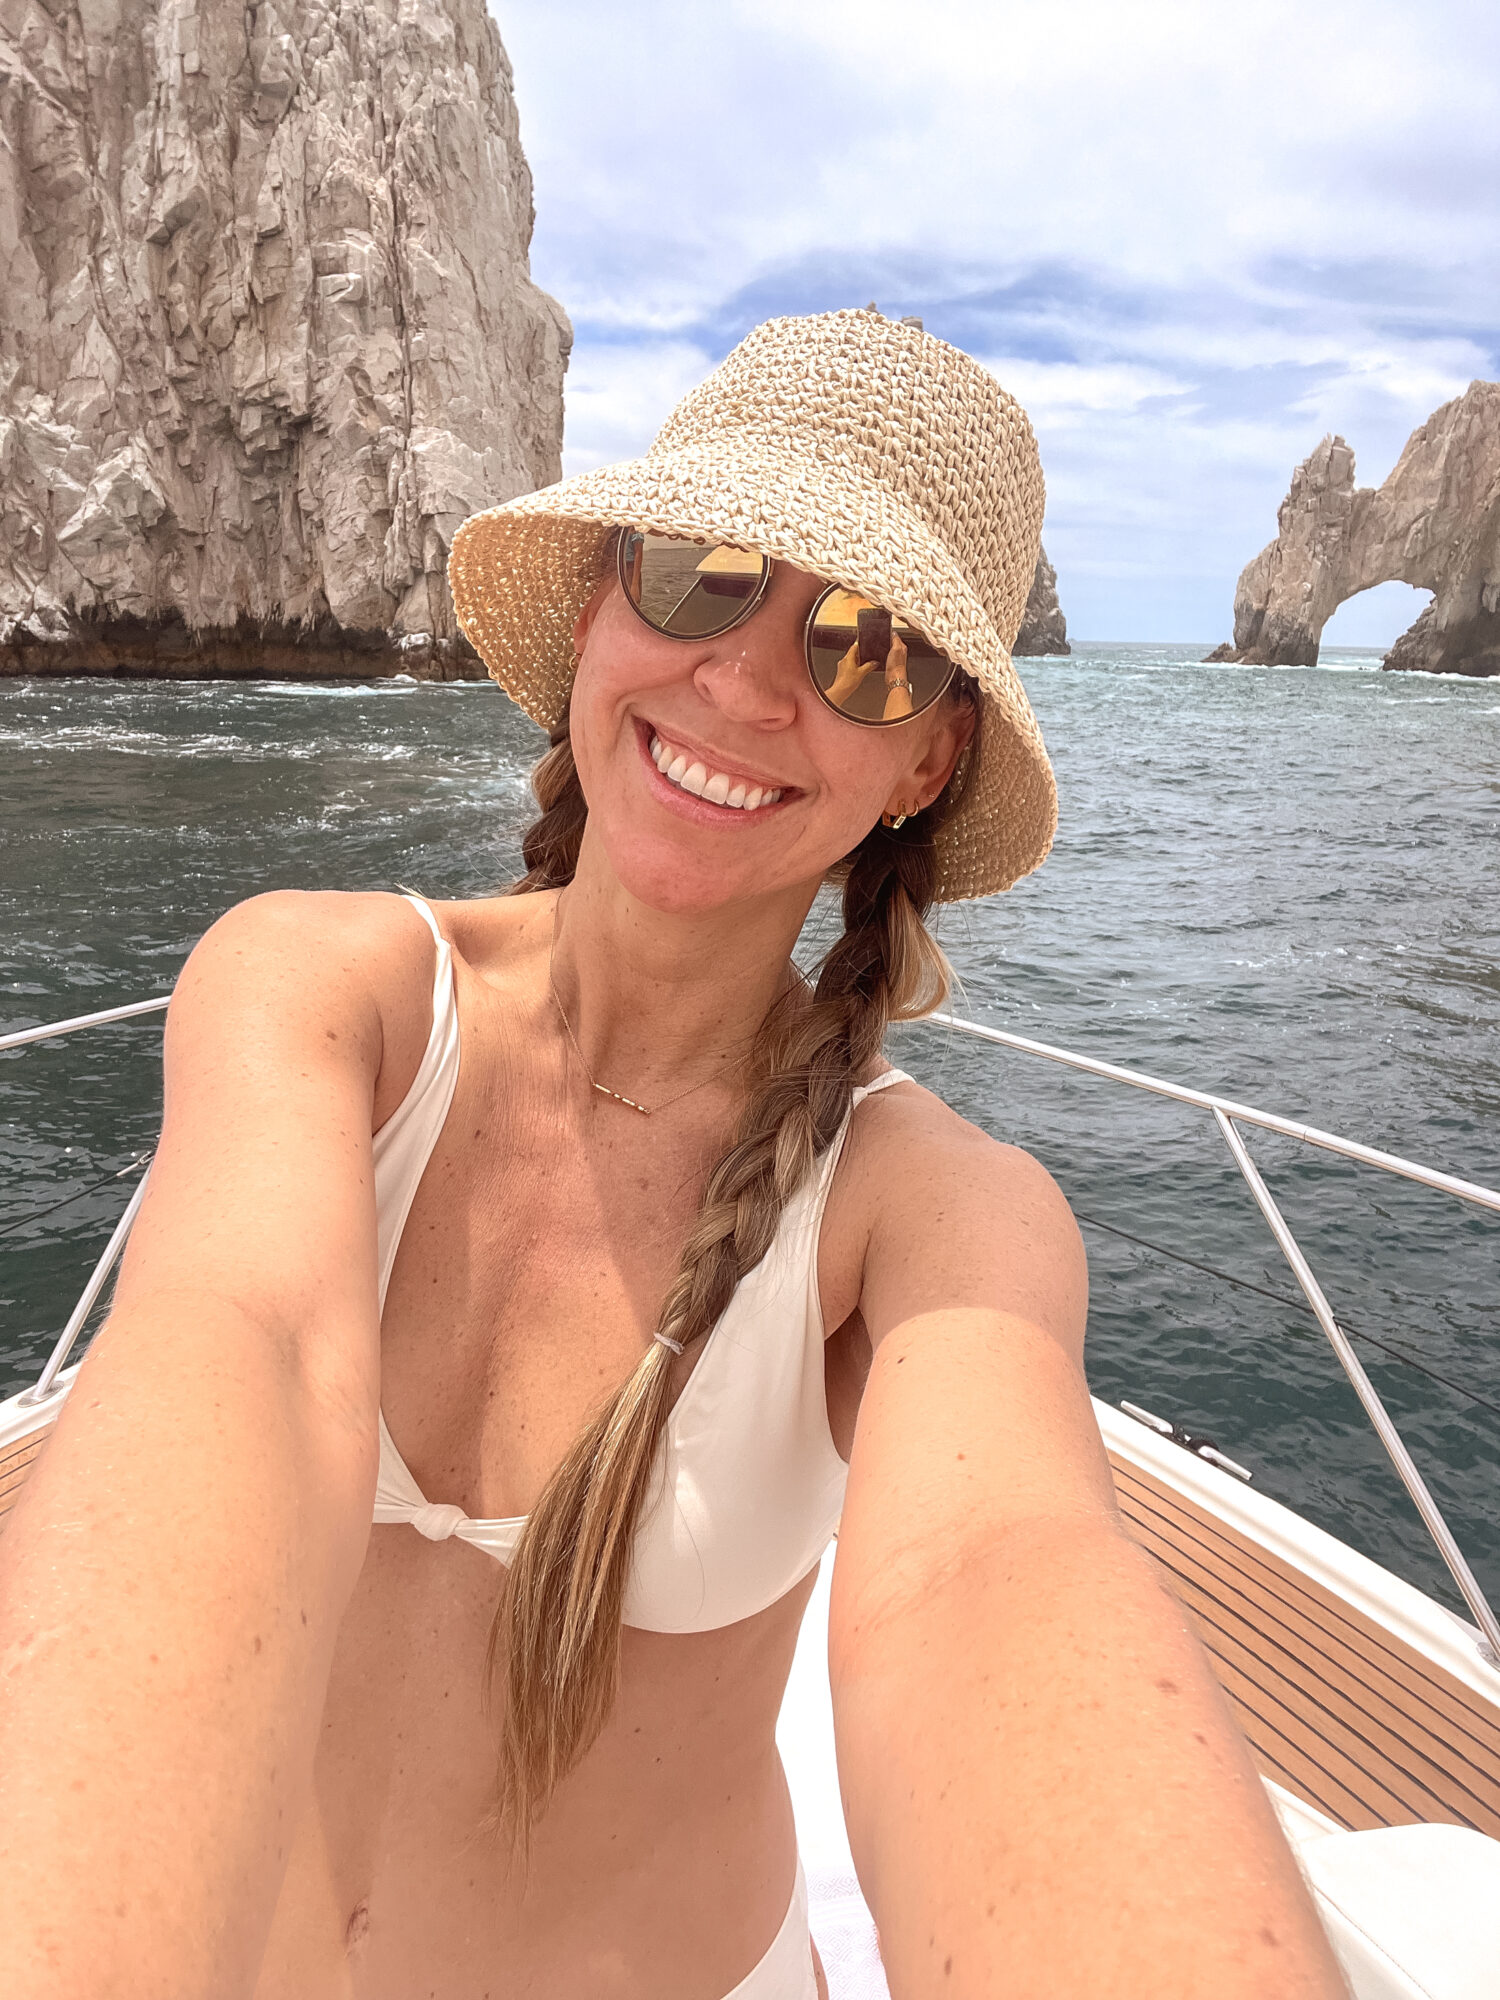 you can't go to cabo without seeing the infamous arch, and from a boat is the best way to see it